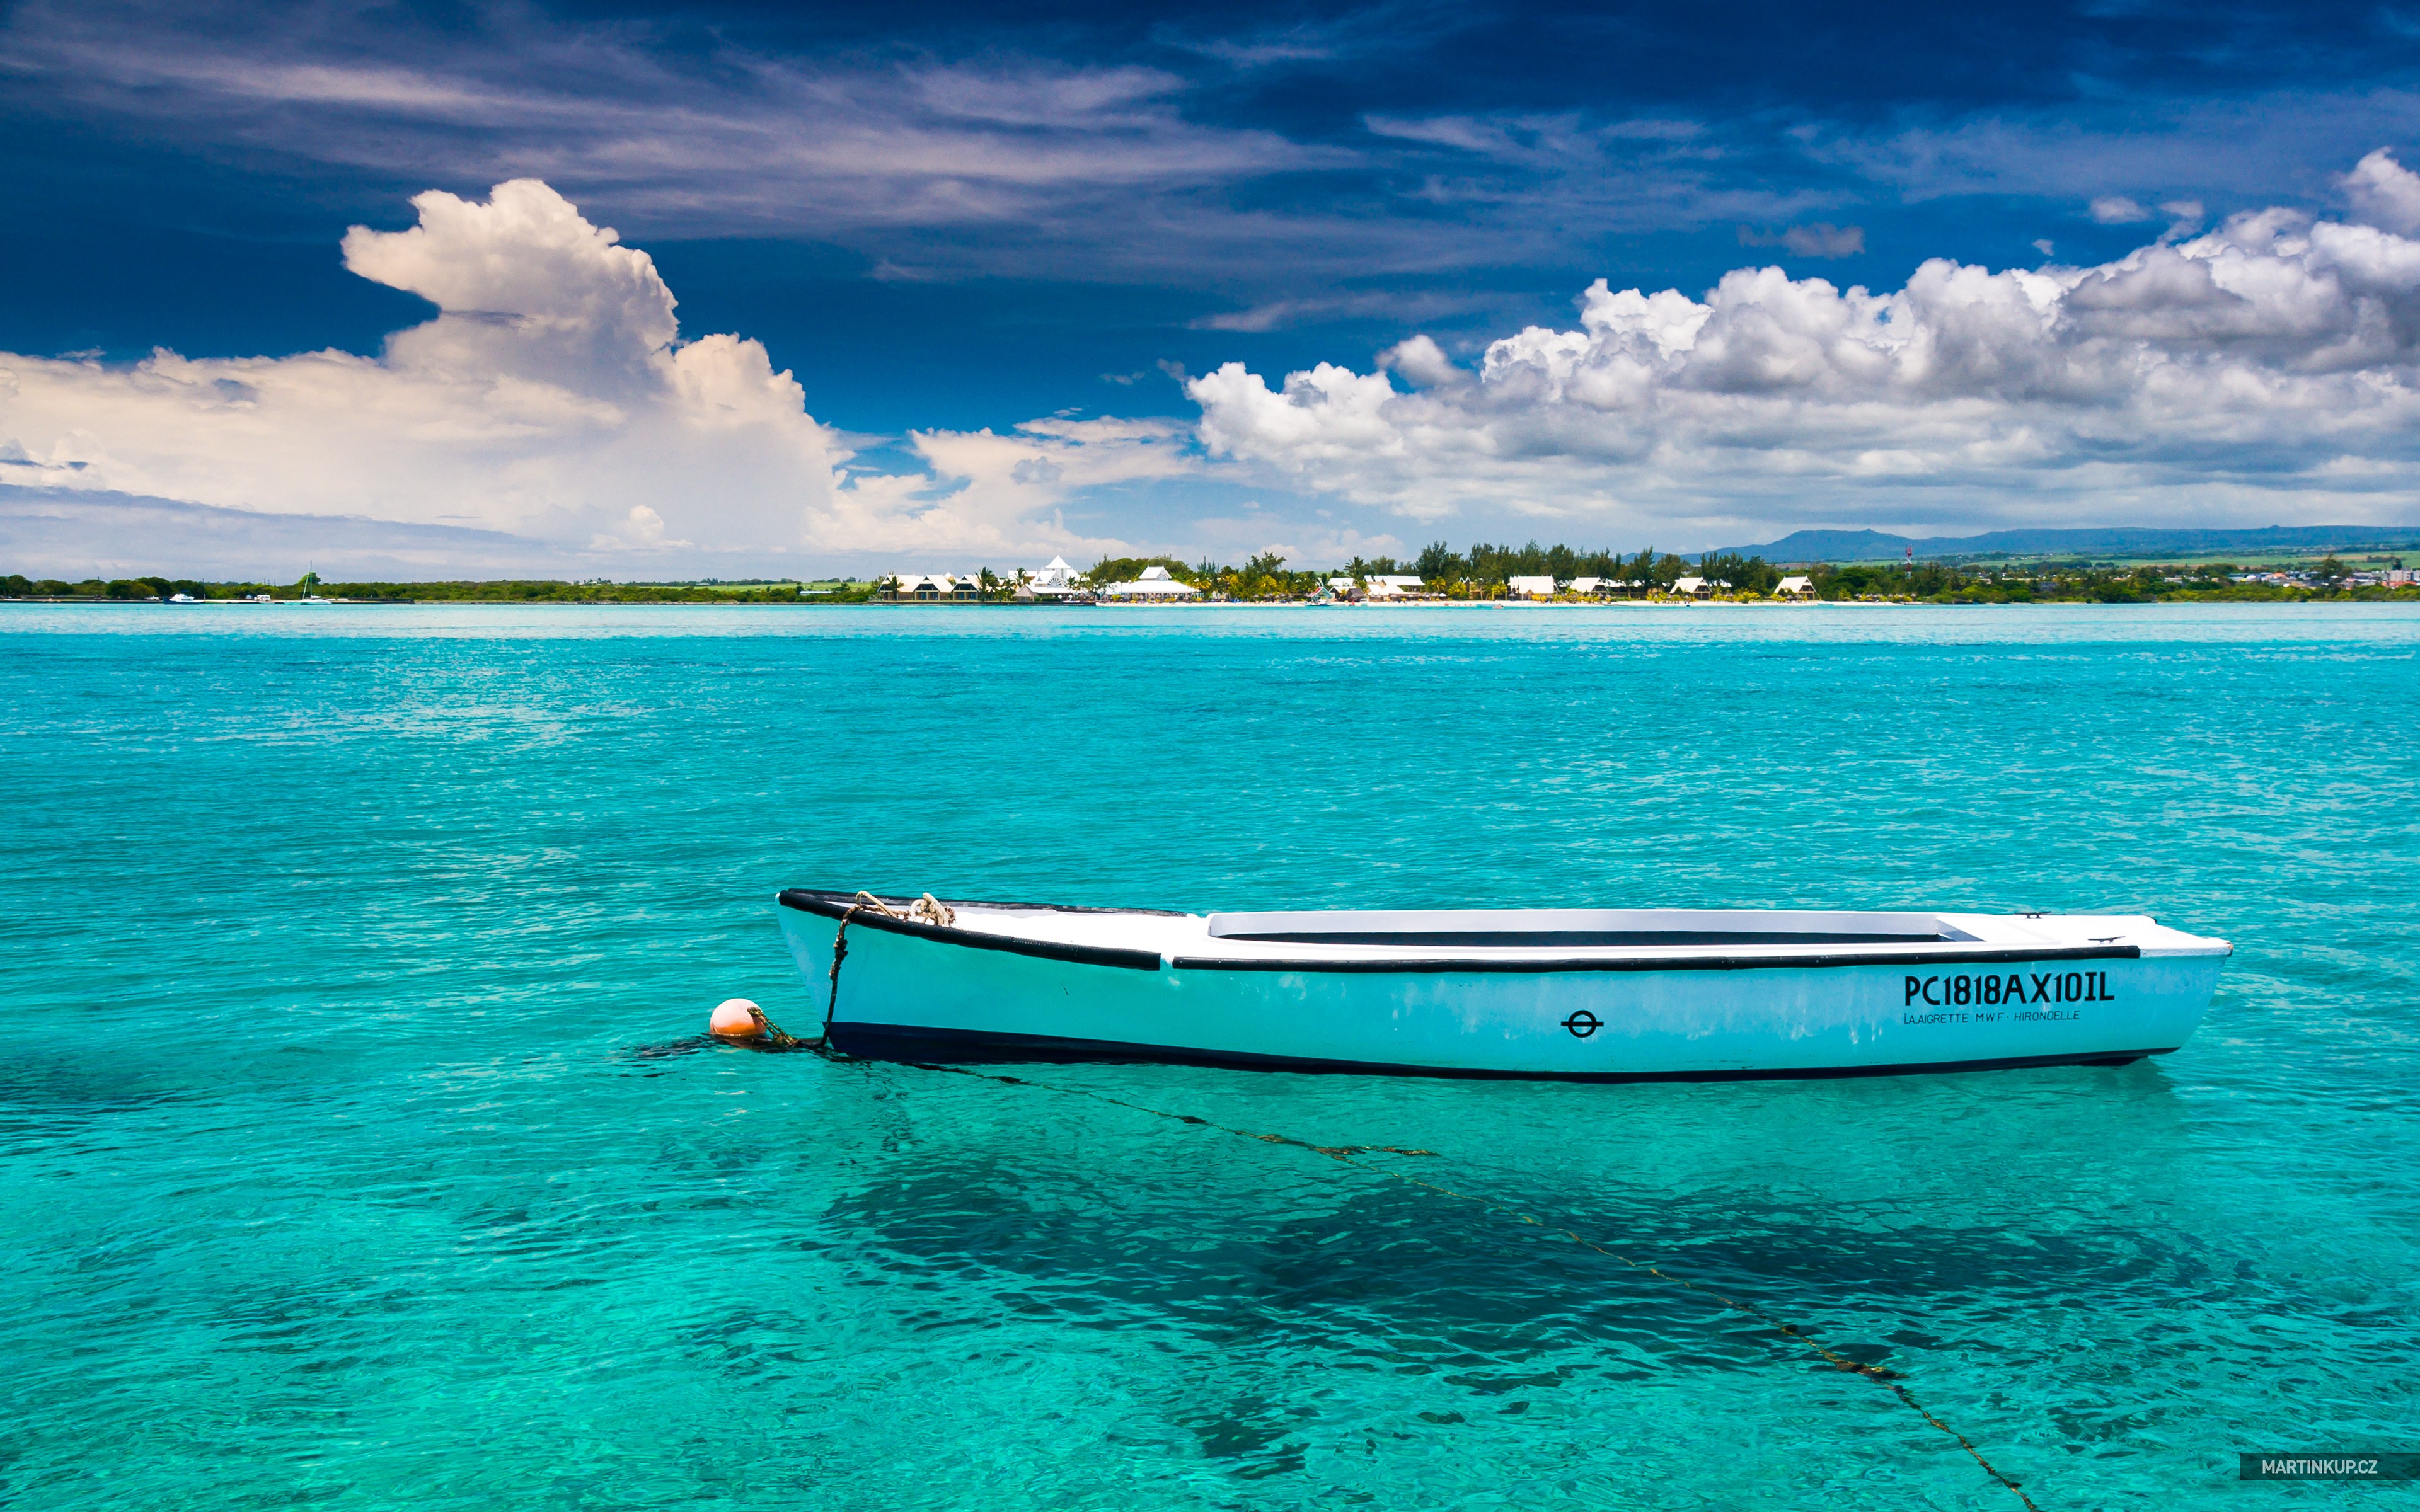 ocean, Clouds, Landscapes, Nature, Tropical, Boats, Hdr, Photography, Mauritius, Sea Wallpaper